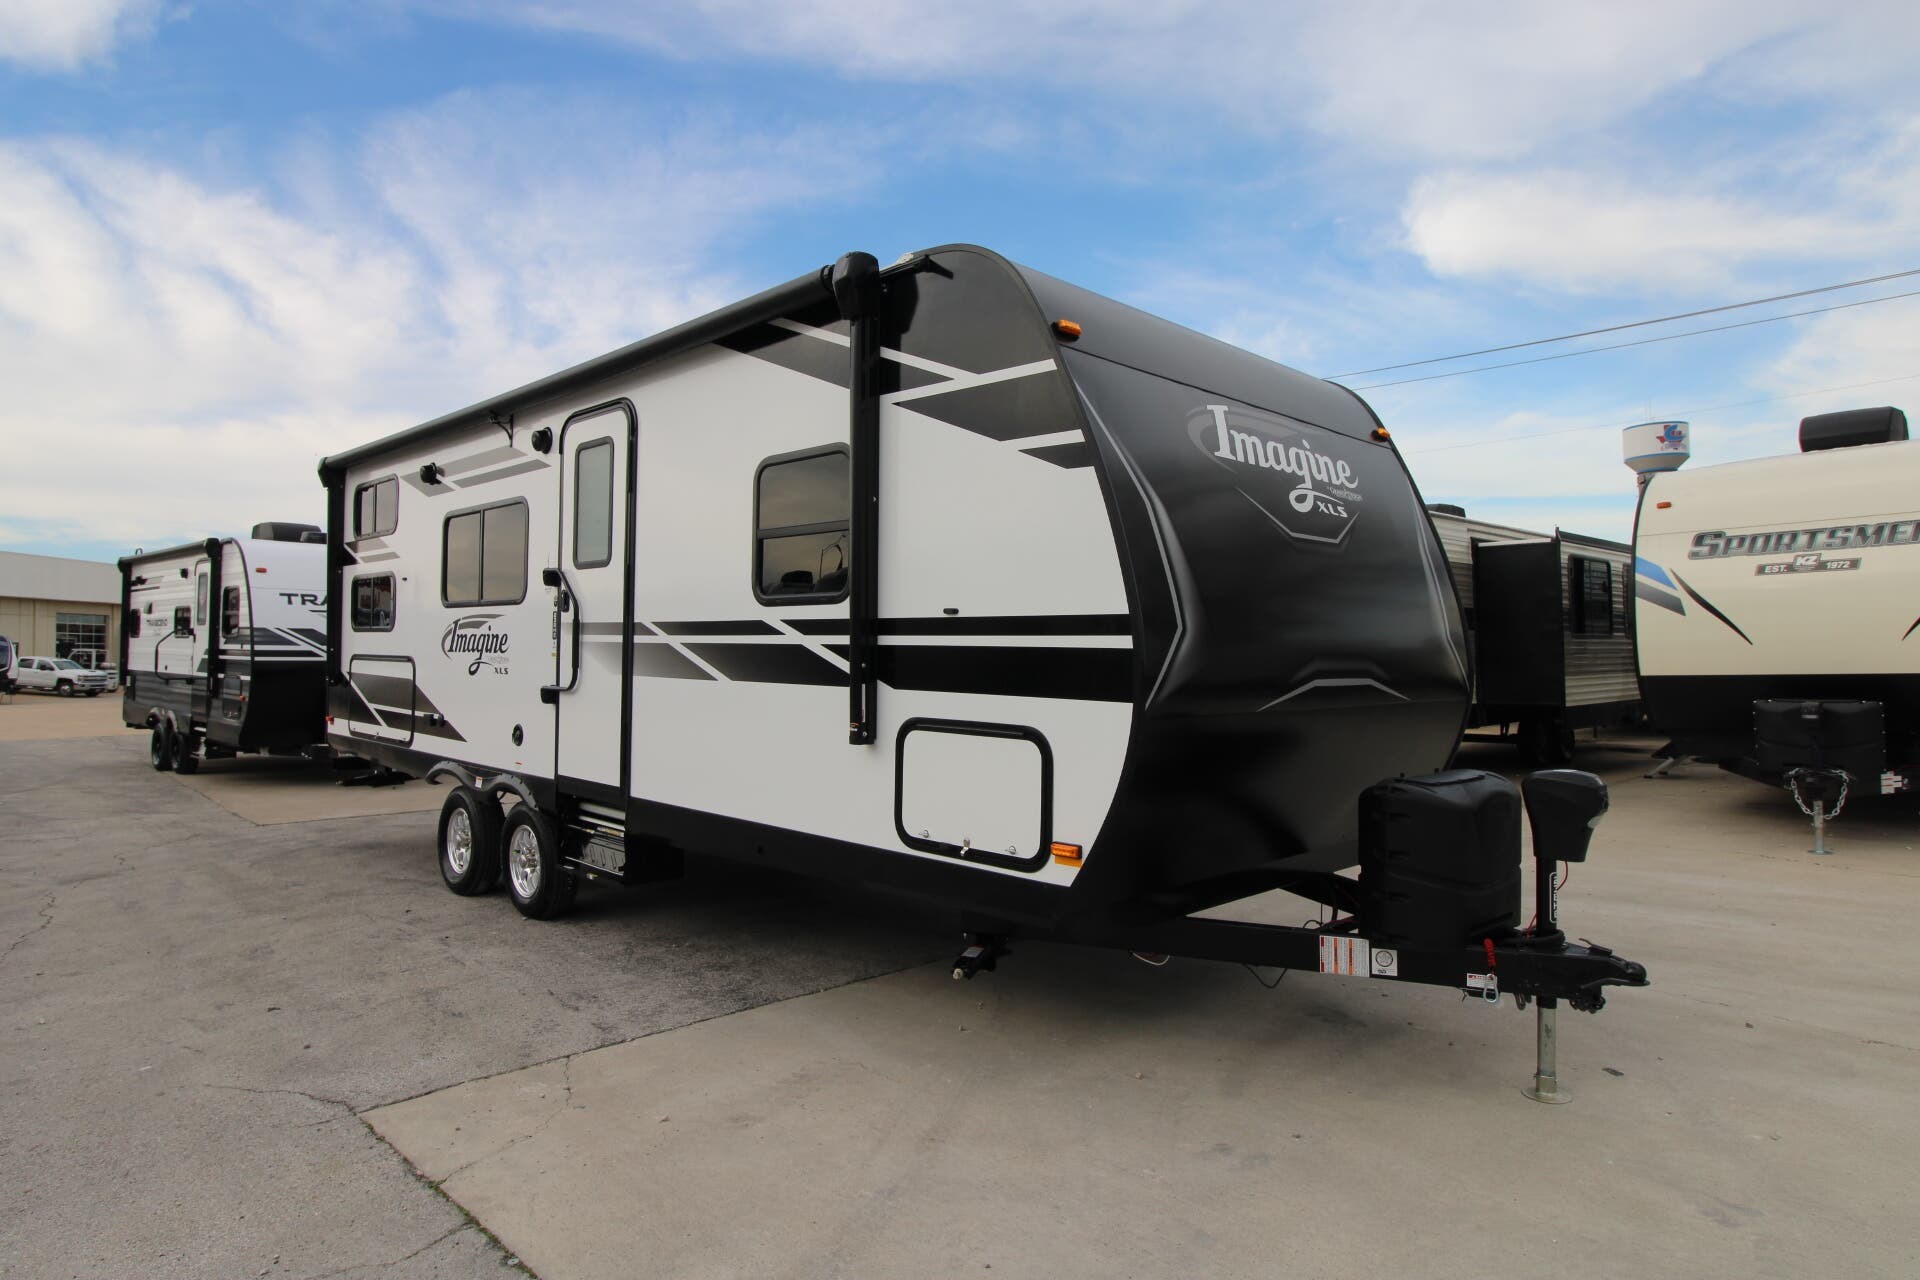 Used Travel trailers for sale in Corinth, TX - TrailersMarket.com